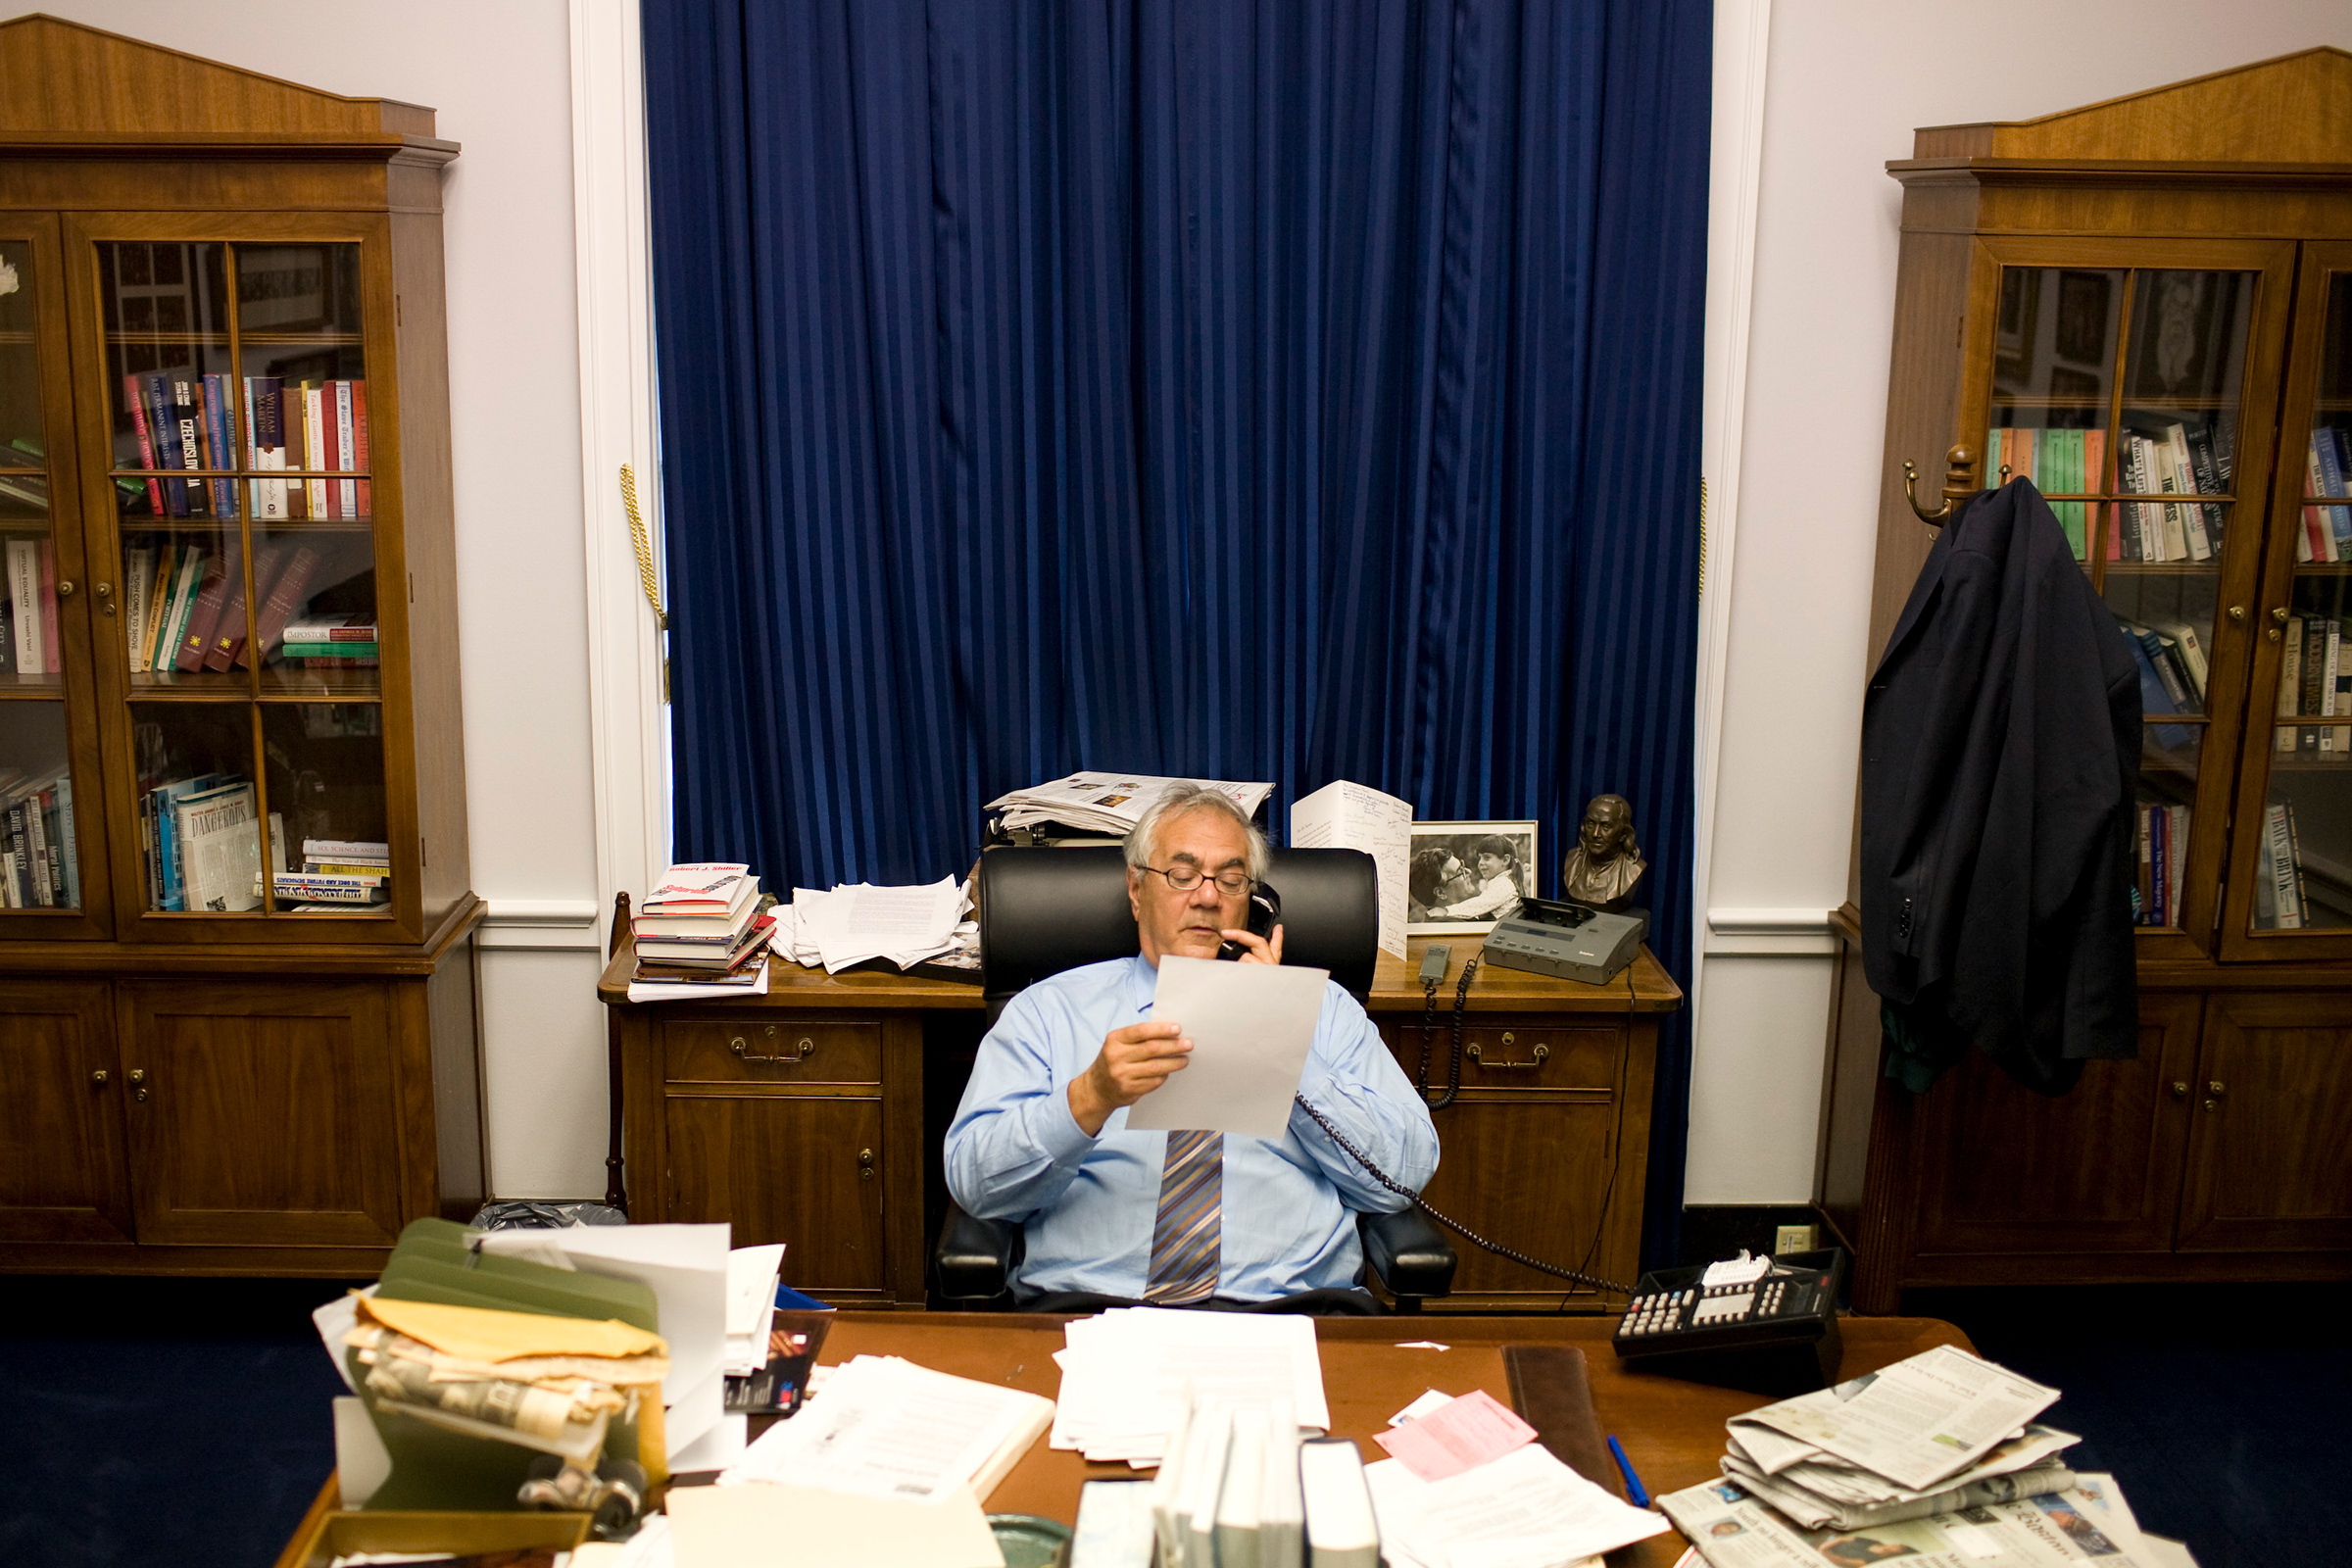 Frank, then chairman of the House Committee on Financial Services, talks on the phone while at work in his office on Capitol Hill in Washington, Sept. 19, 2008.